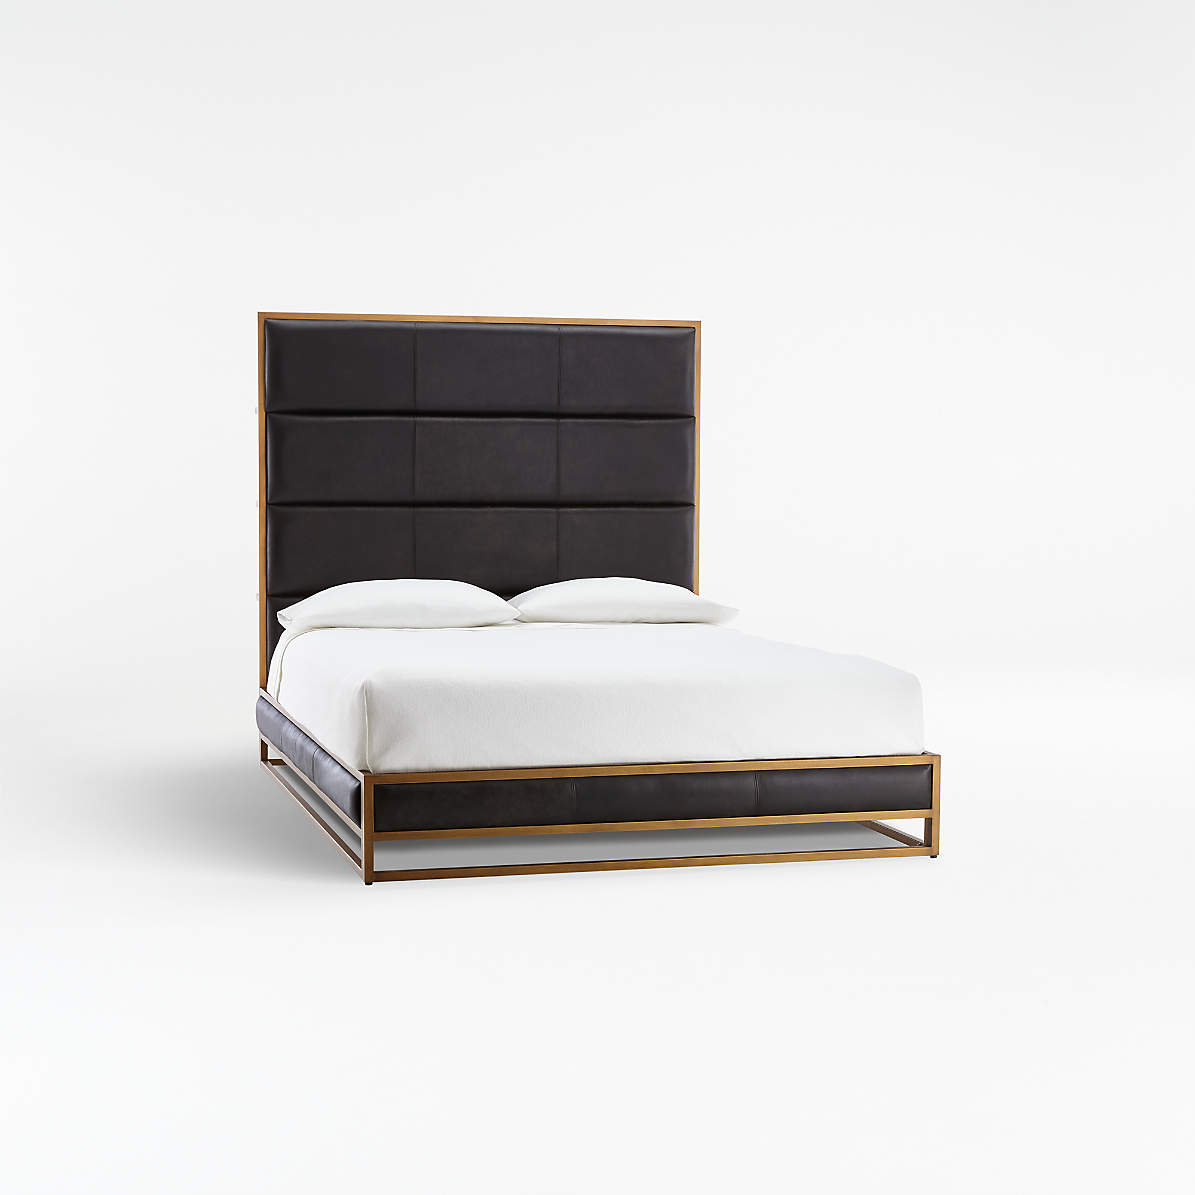 Oxford Leather Bed Crate And Barrel, Leather Bed Headboard